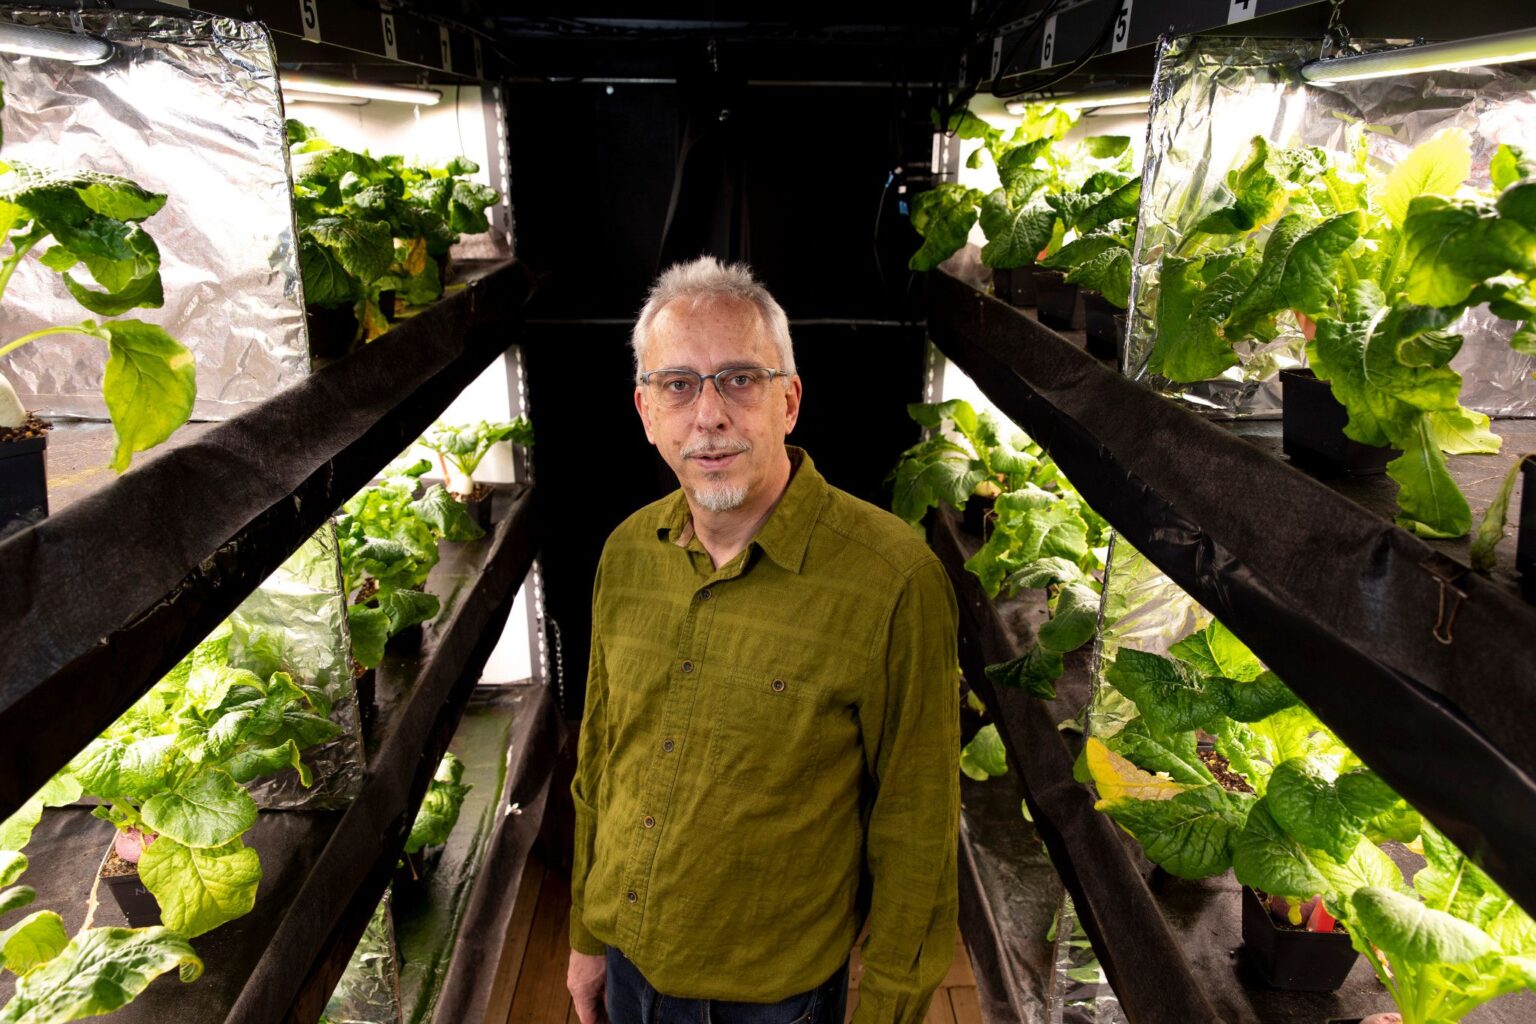 Marc Van Iersel among turnip plants in a grow room at his greenhouses. (Photo by Andrew Davis Tucker/UGA)